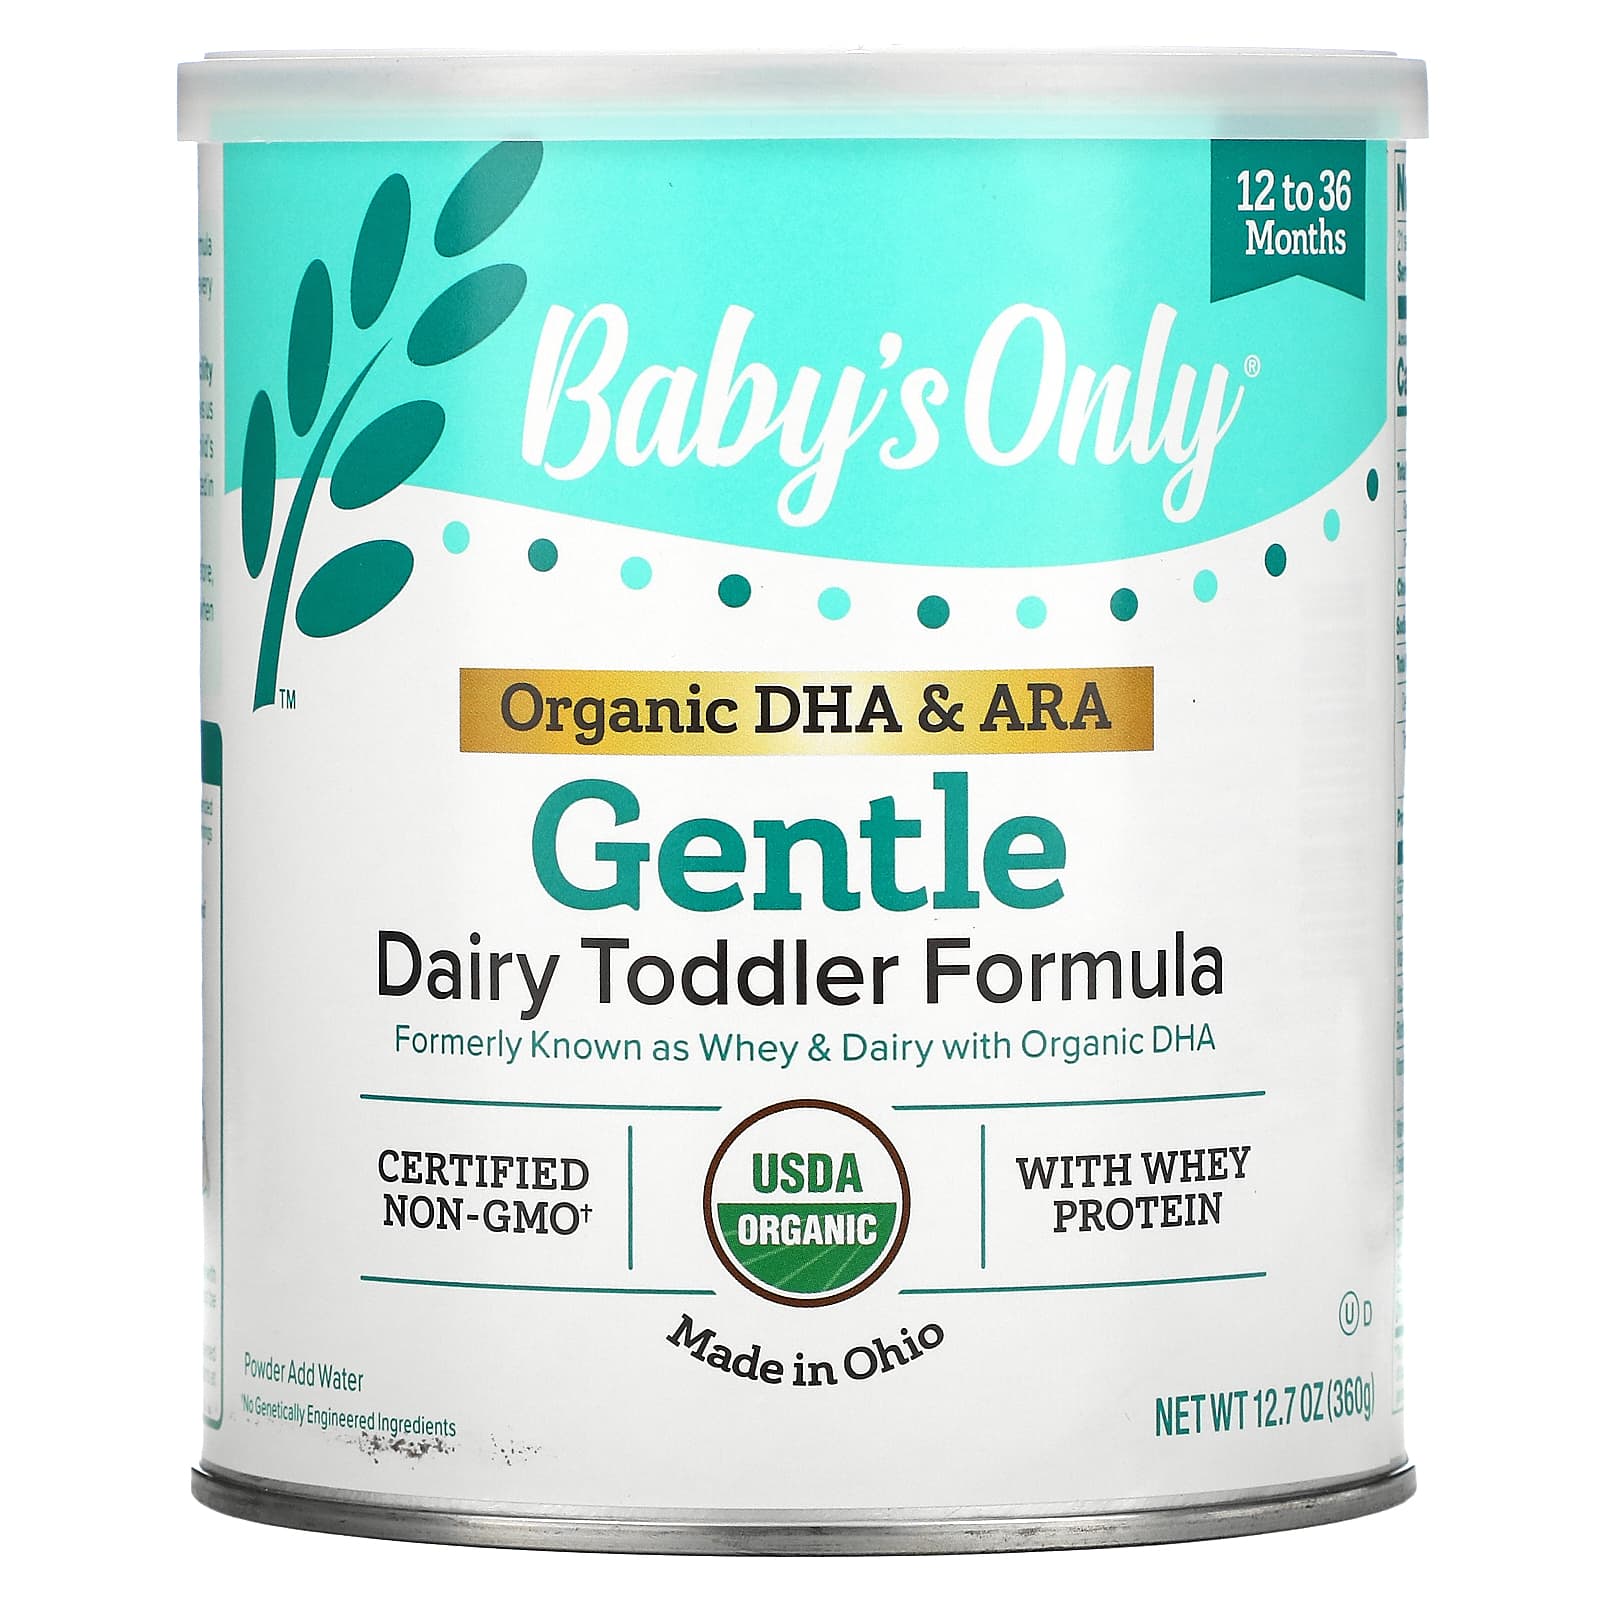 Nature's One, Dairy Toddler Formula, Gentle, 12 to 36 Months, 12.7